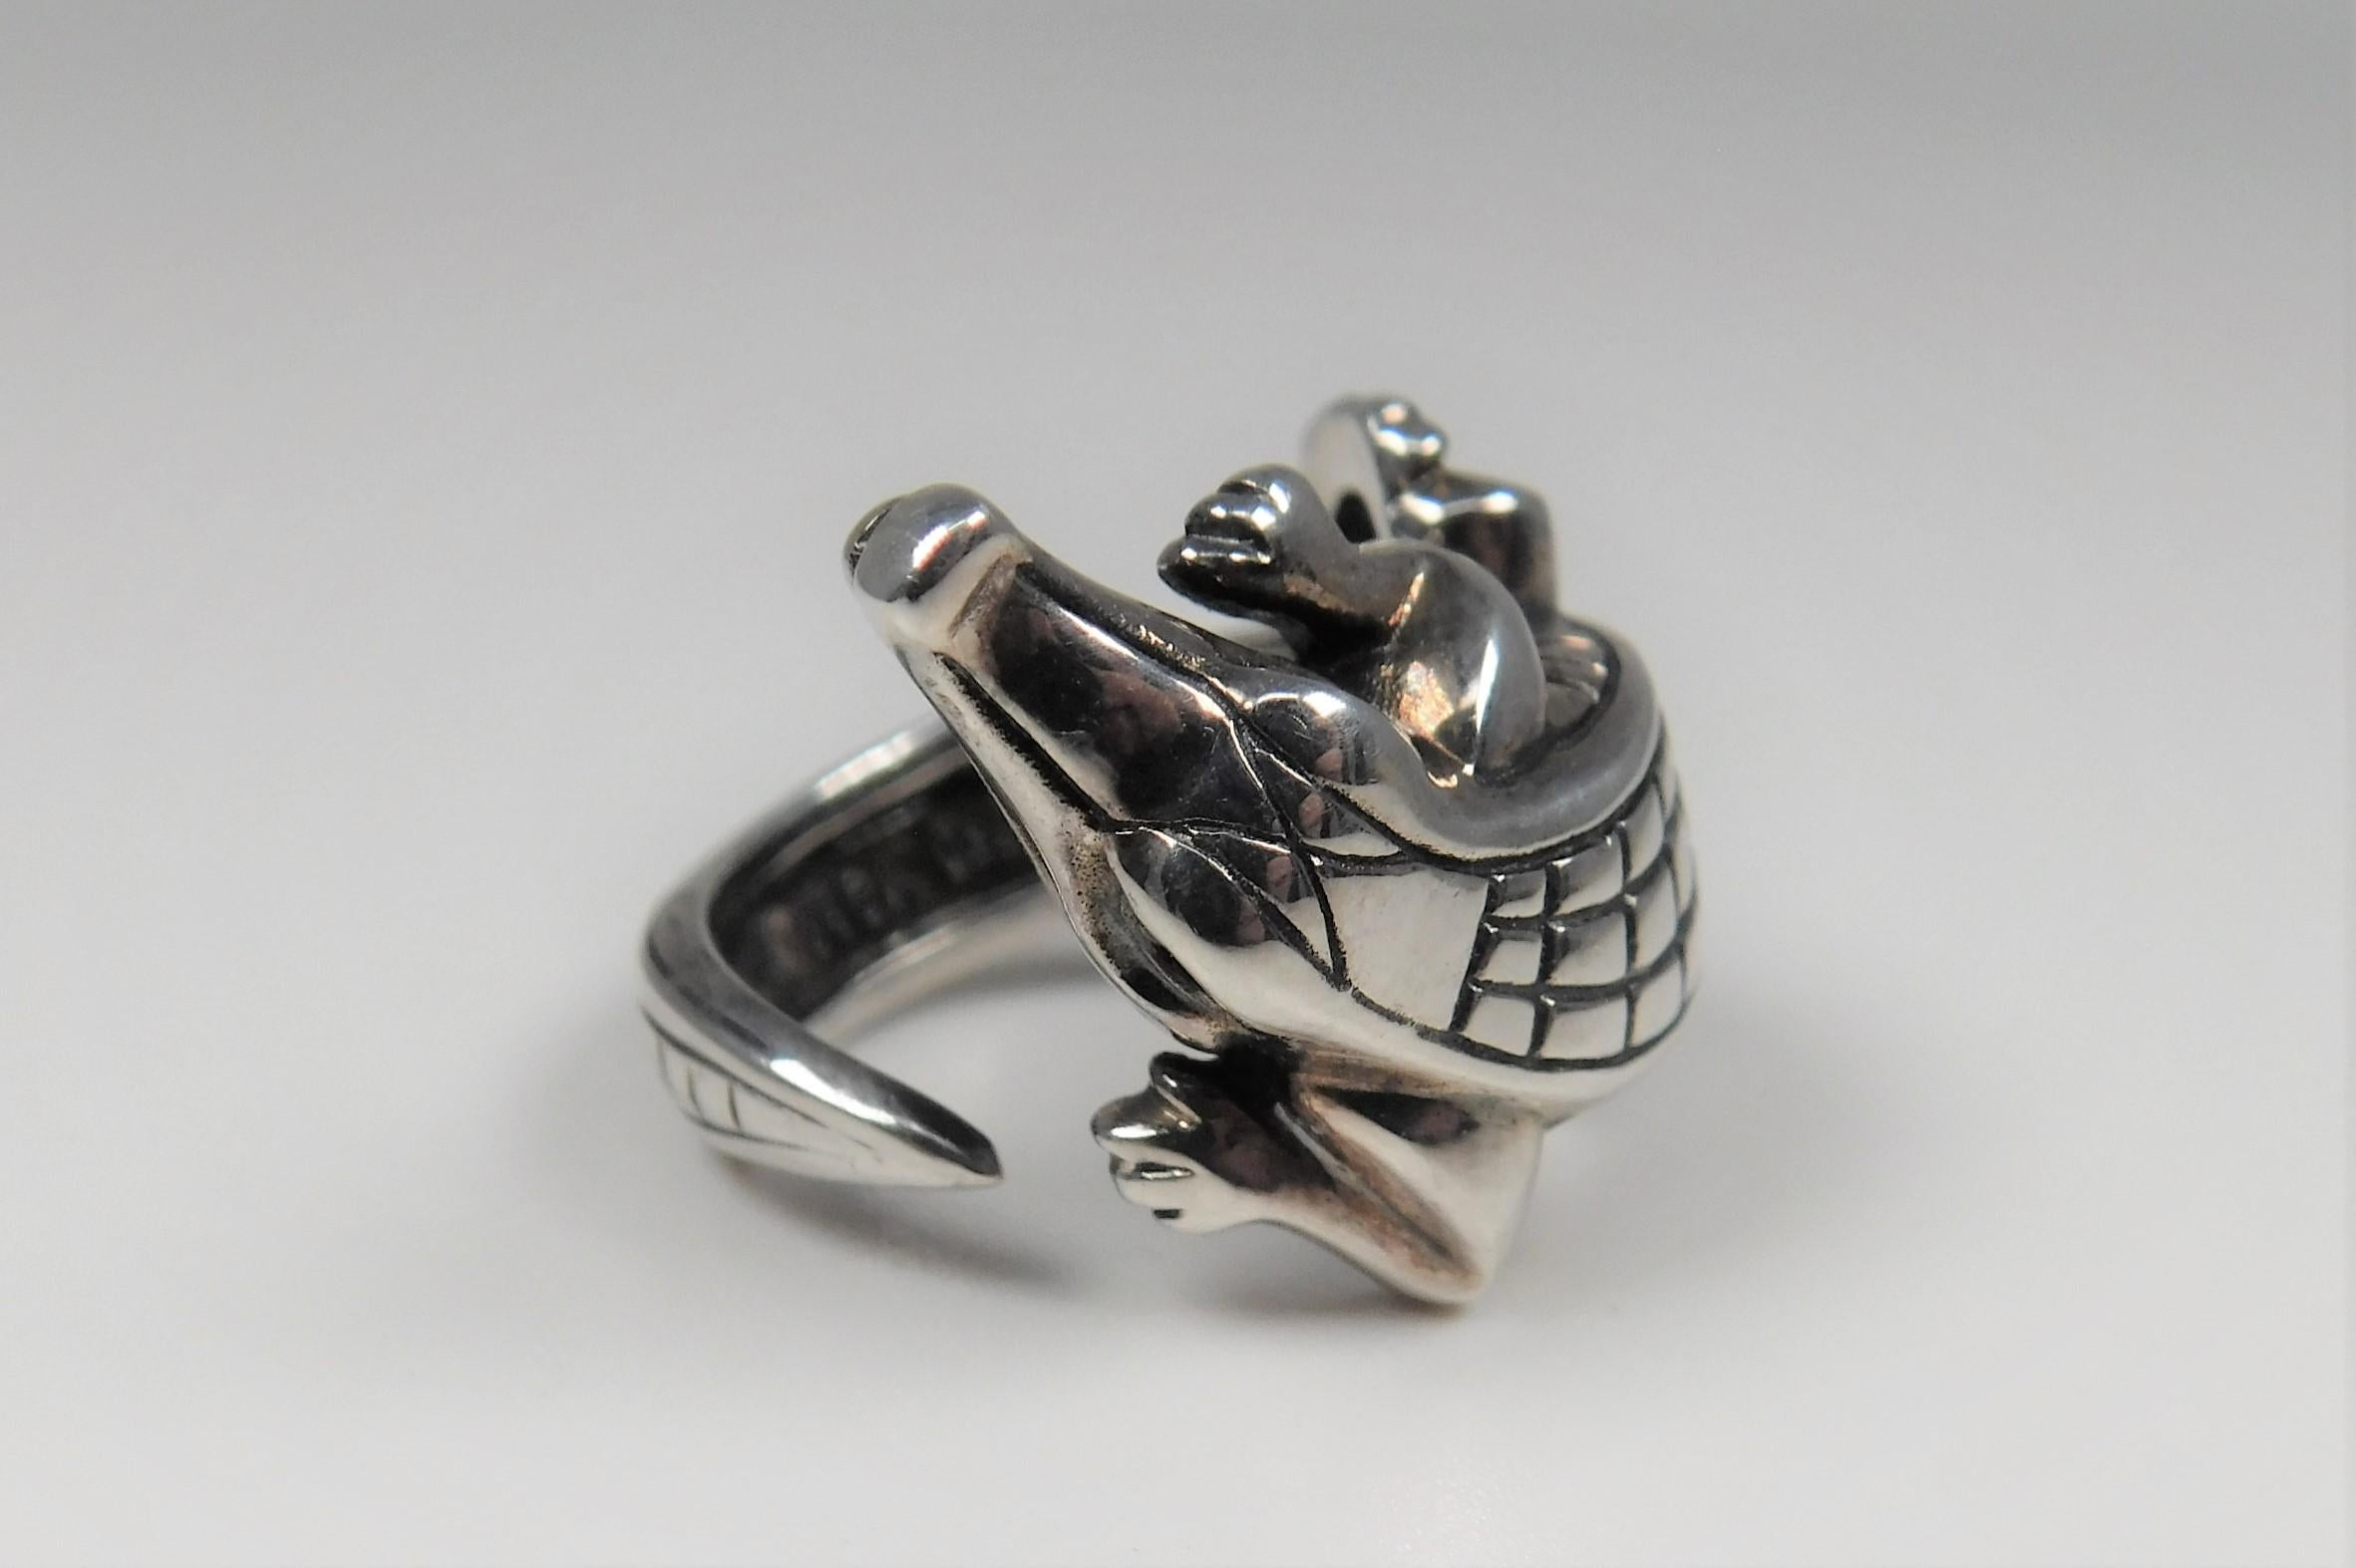 Kieselstein-Cord sterling silver Alligator ring with accent diamond eyes.